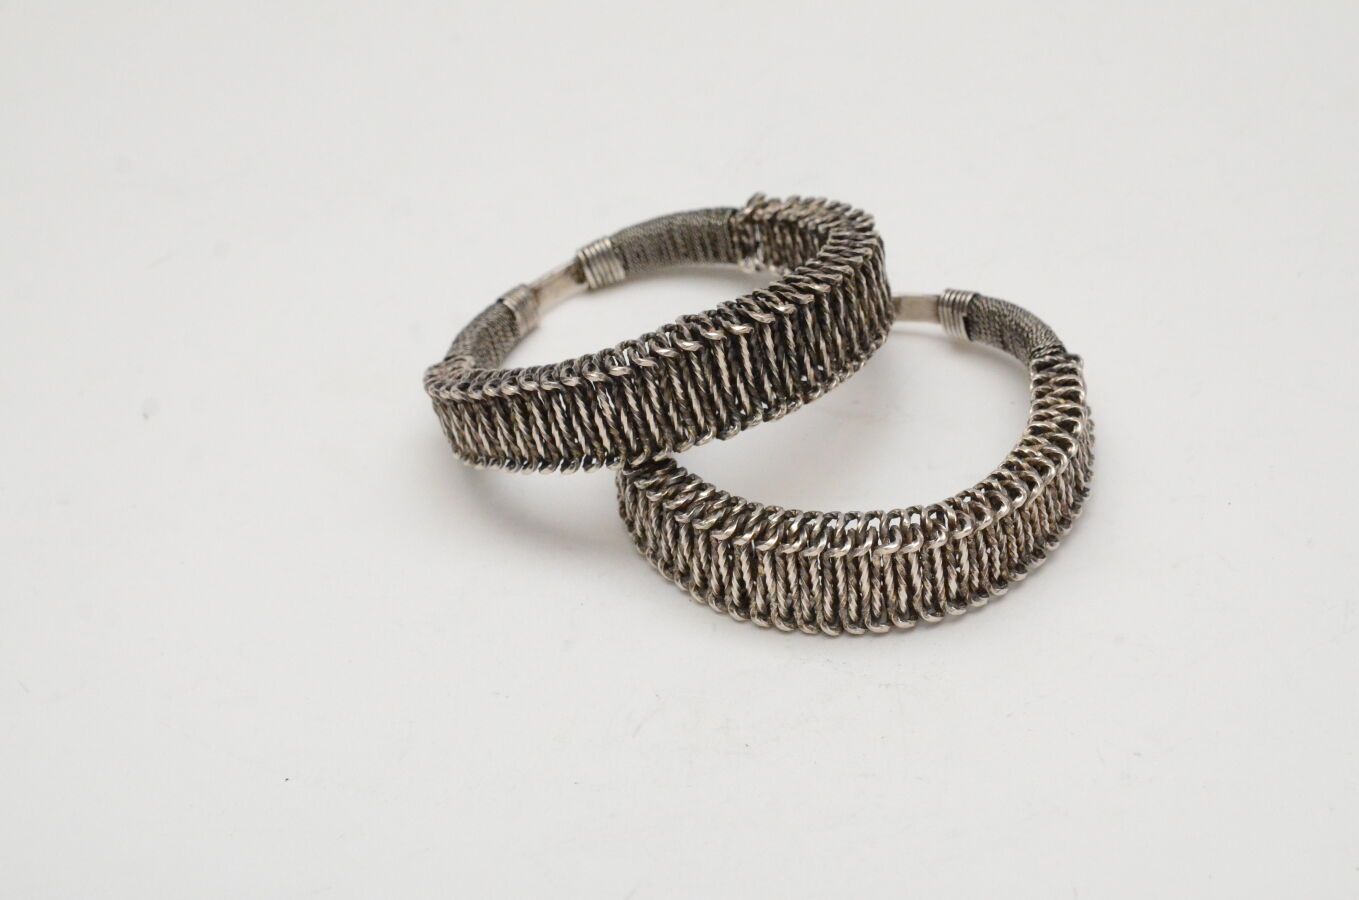 Null Pair of bracelets
twisted metal and a silver bracelet with scrolls.
Miao, G&hellip;